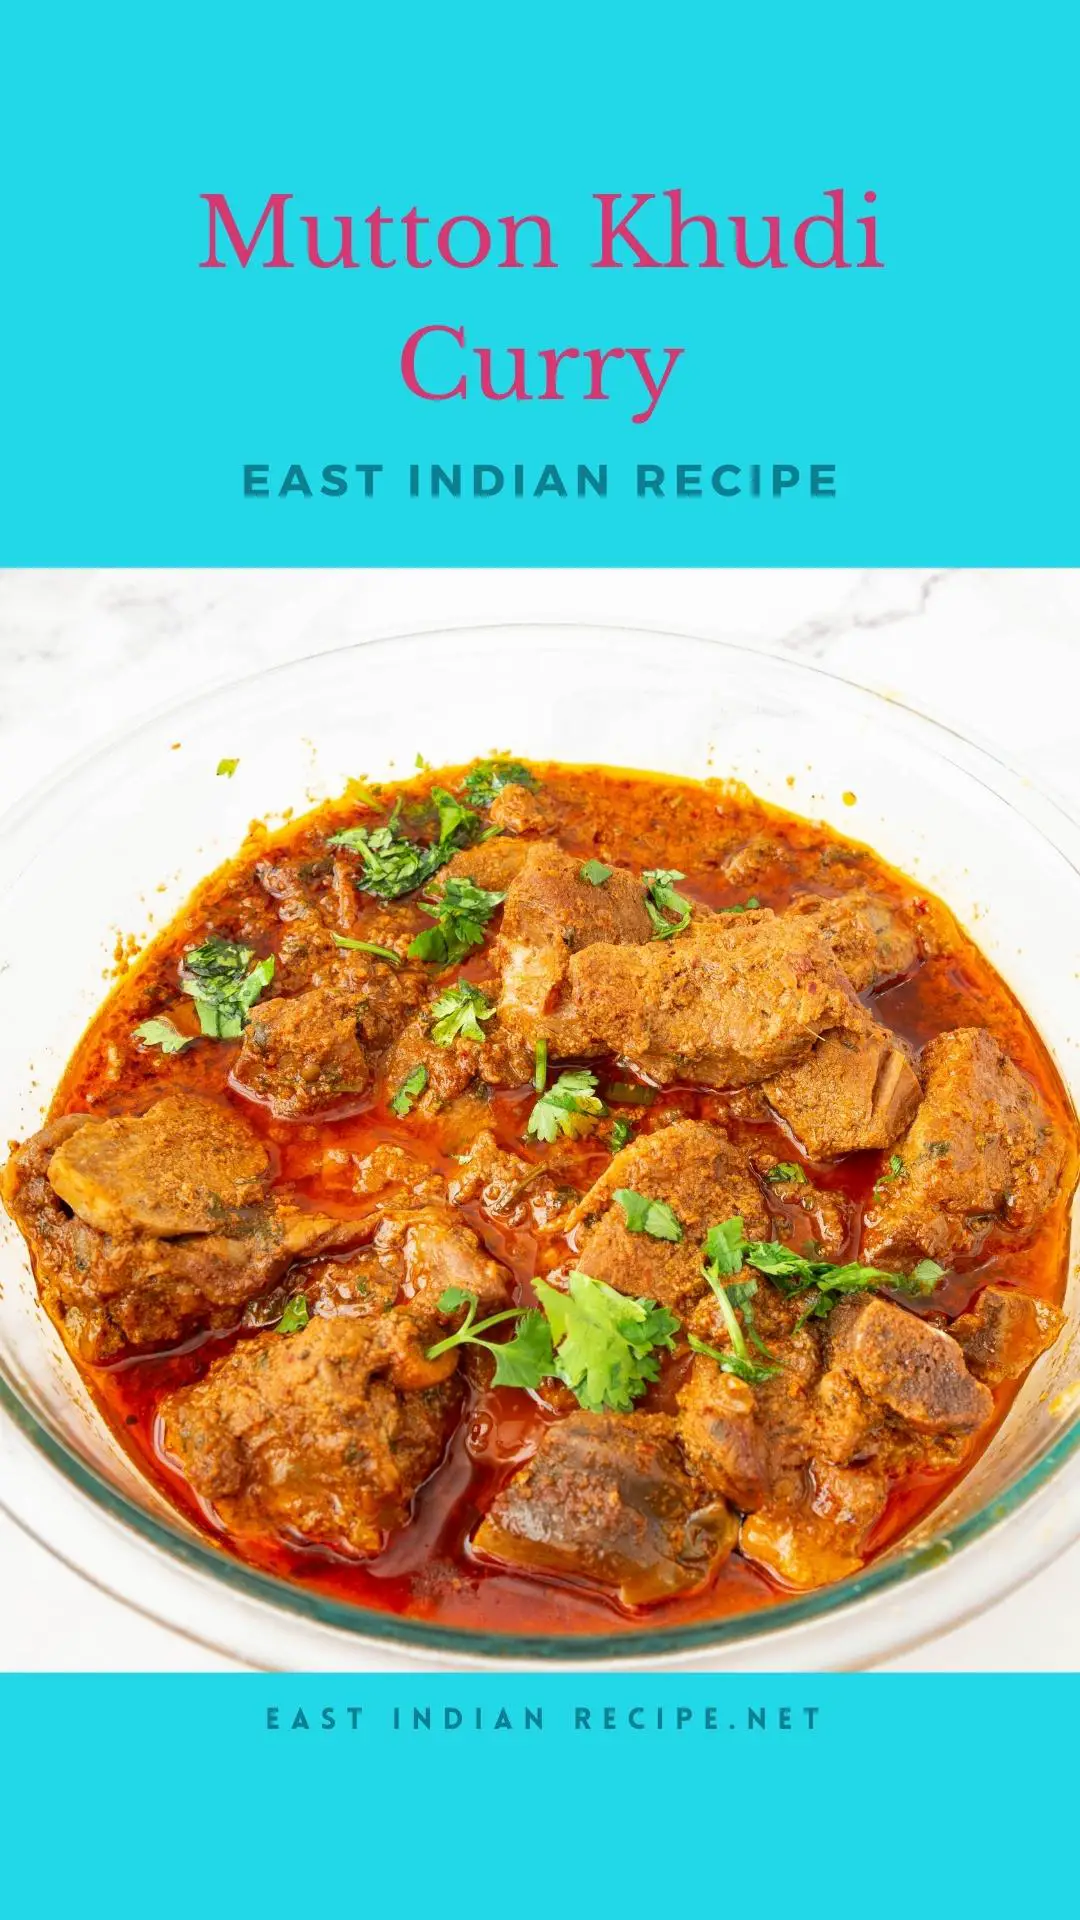 Mutton Khudi Curry - Mutton with Bottle Masala - East Indian Recipes